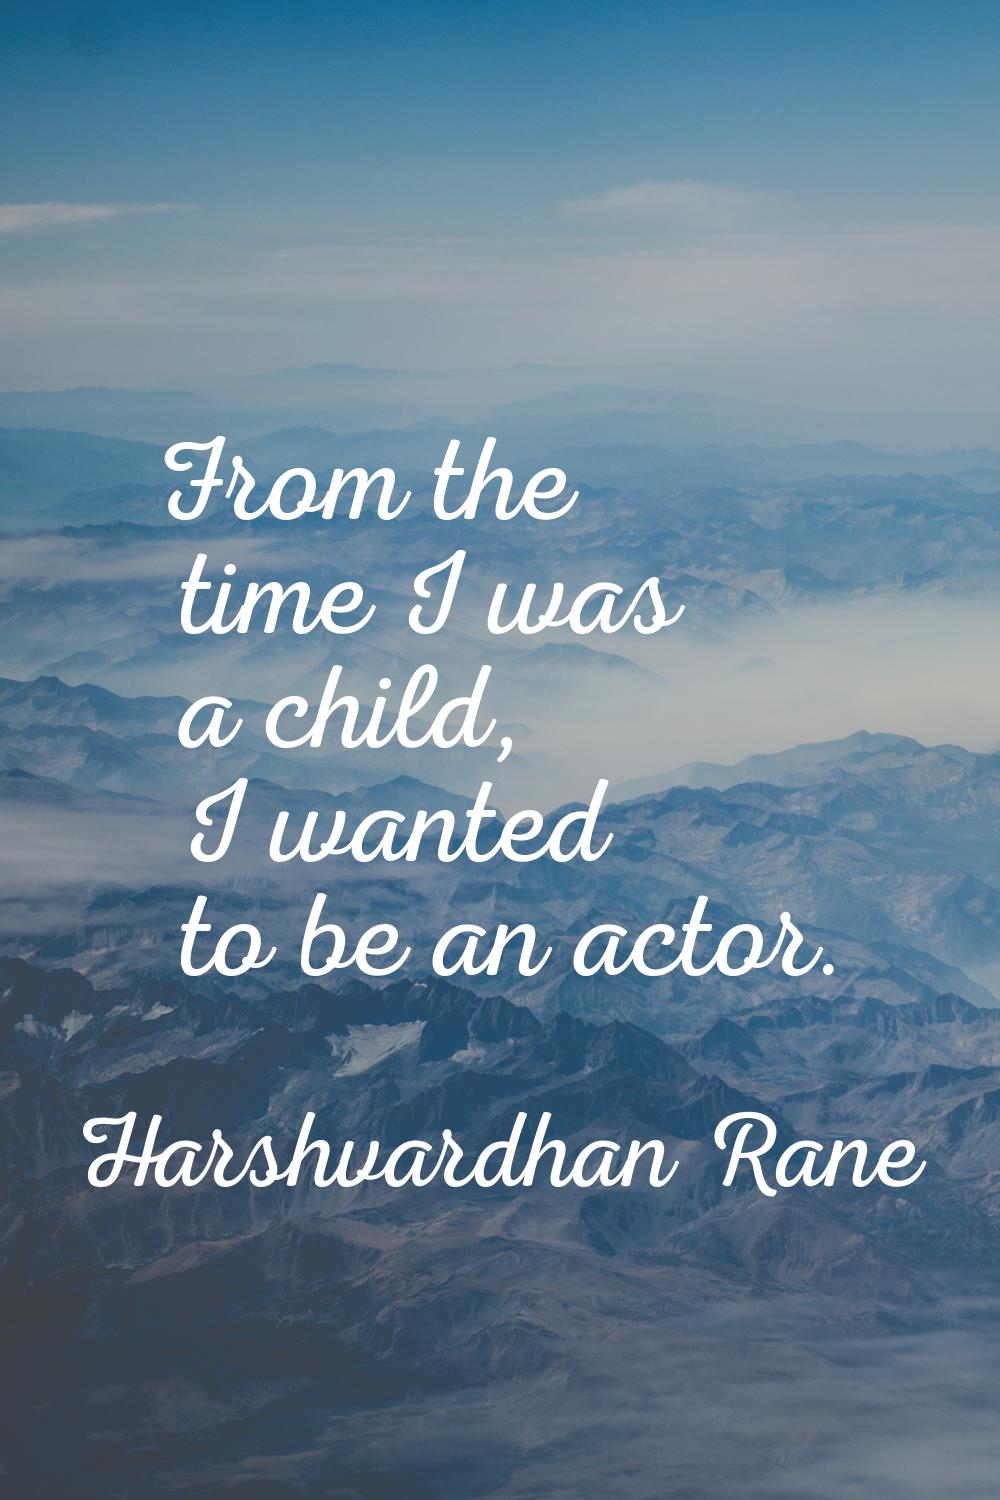 From the time I was a child, I wanted to be an actor.